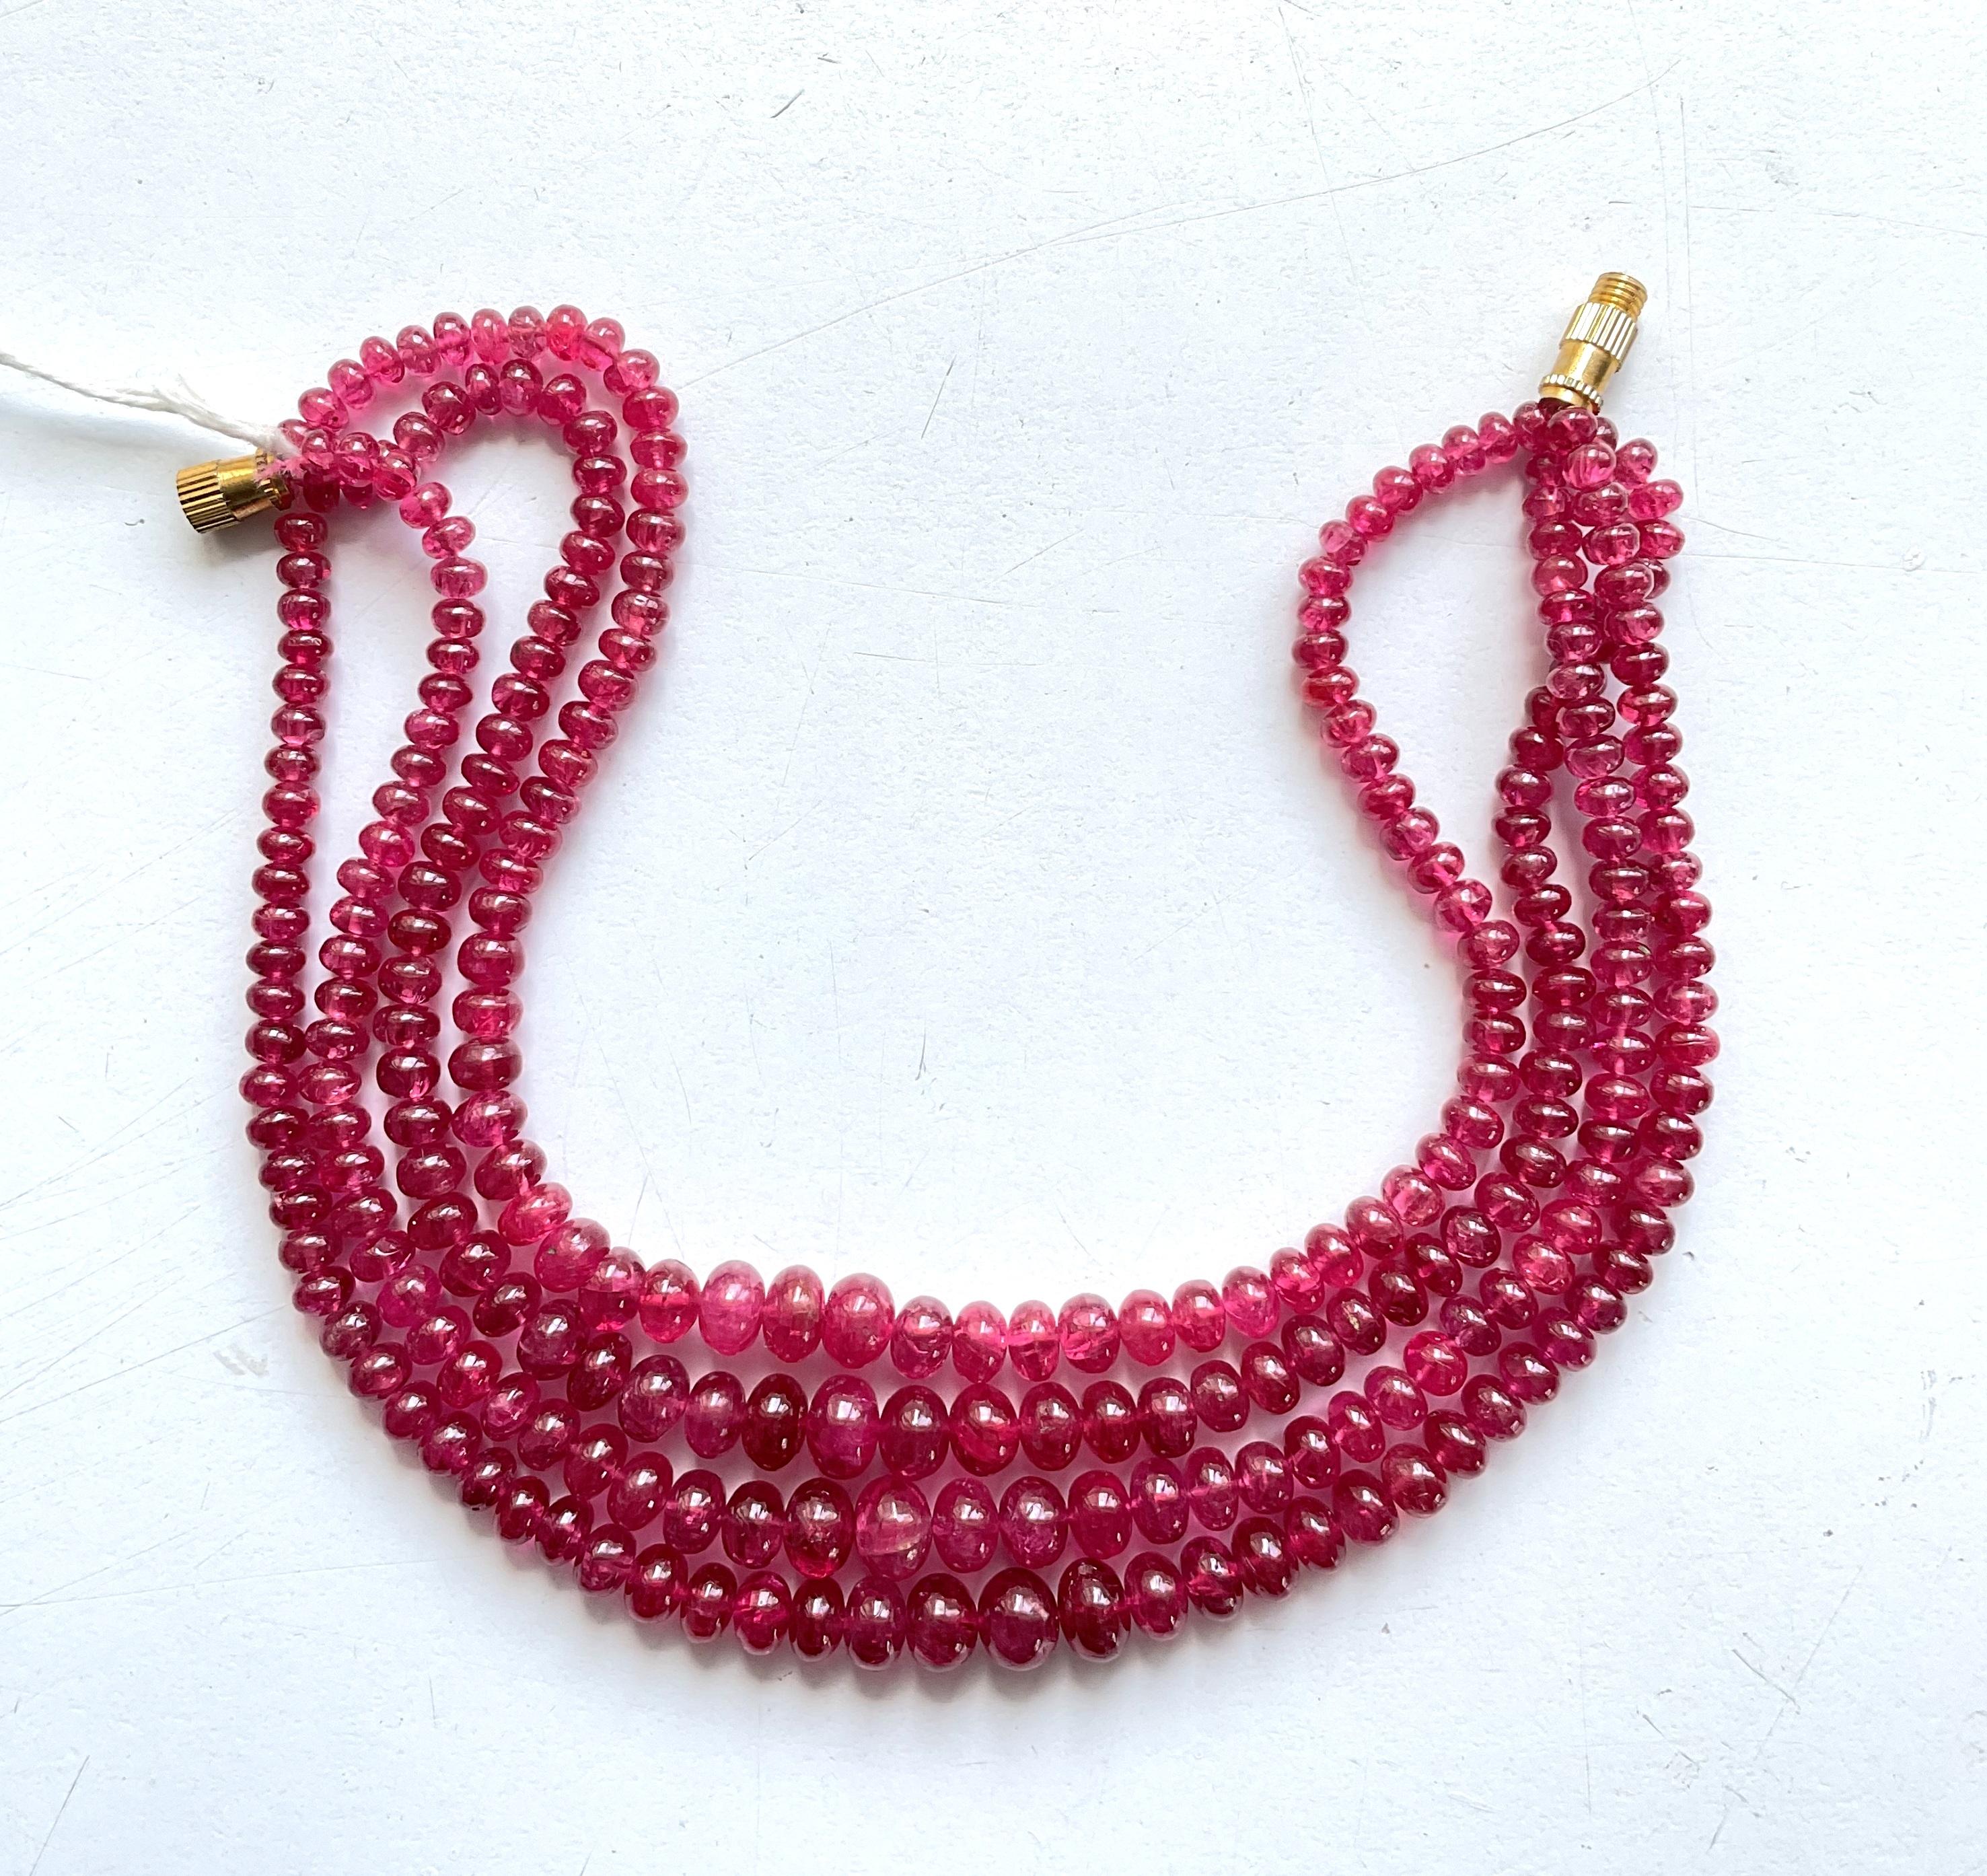 165.75 Carats Burma Red Spinel Beads Top Quality Beaded Necklace Natural Gem For Sale 3